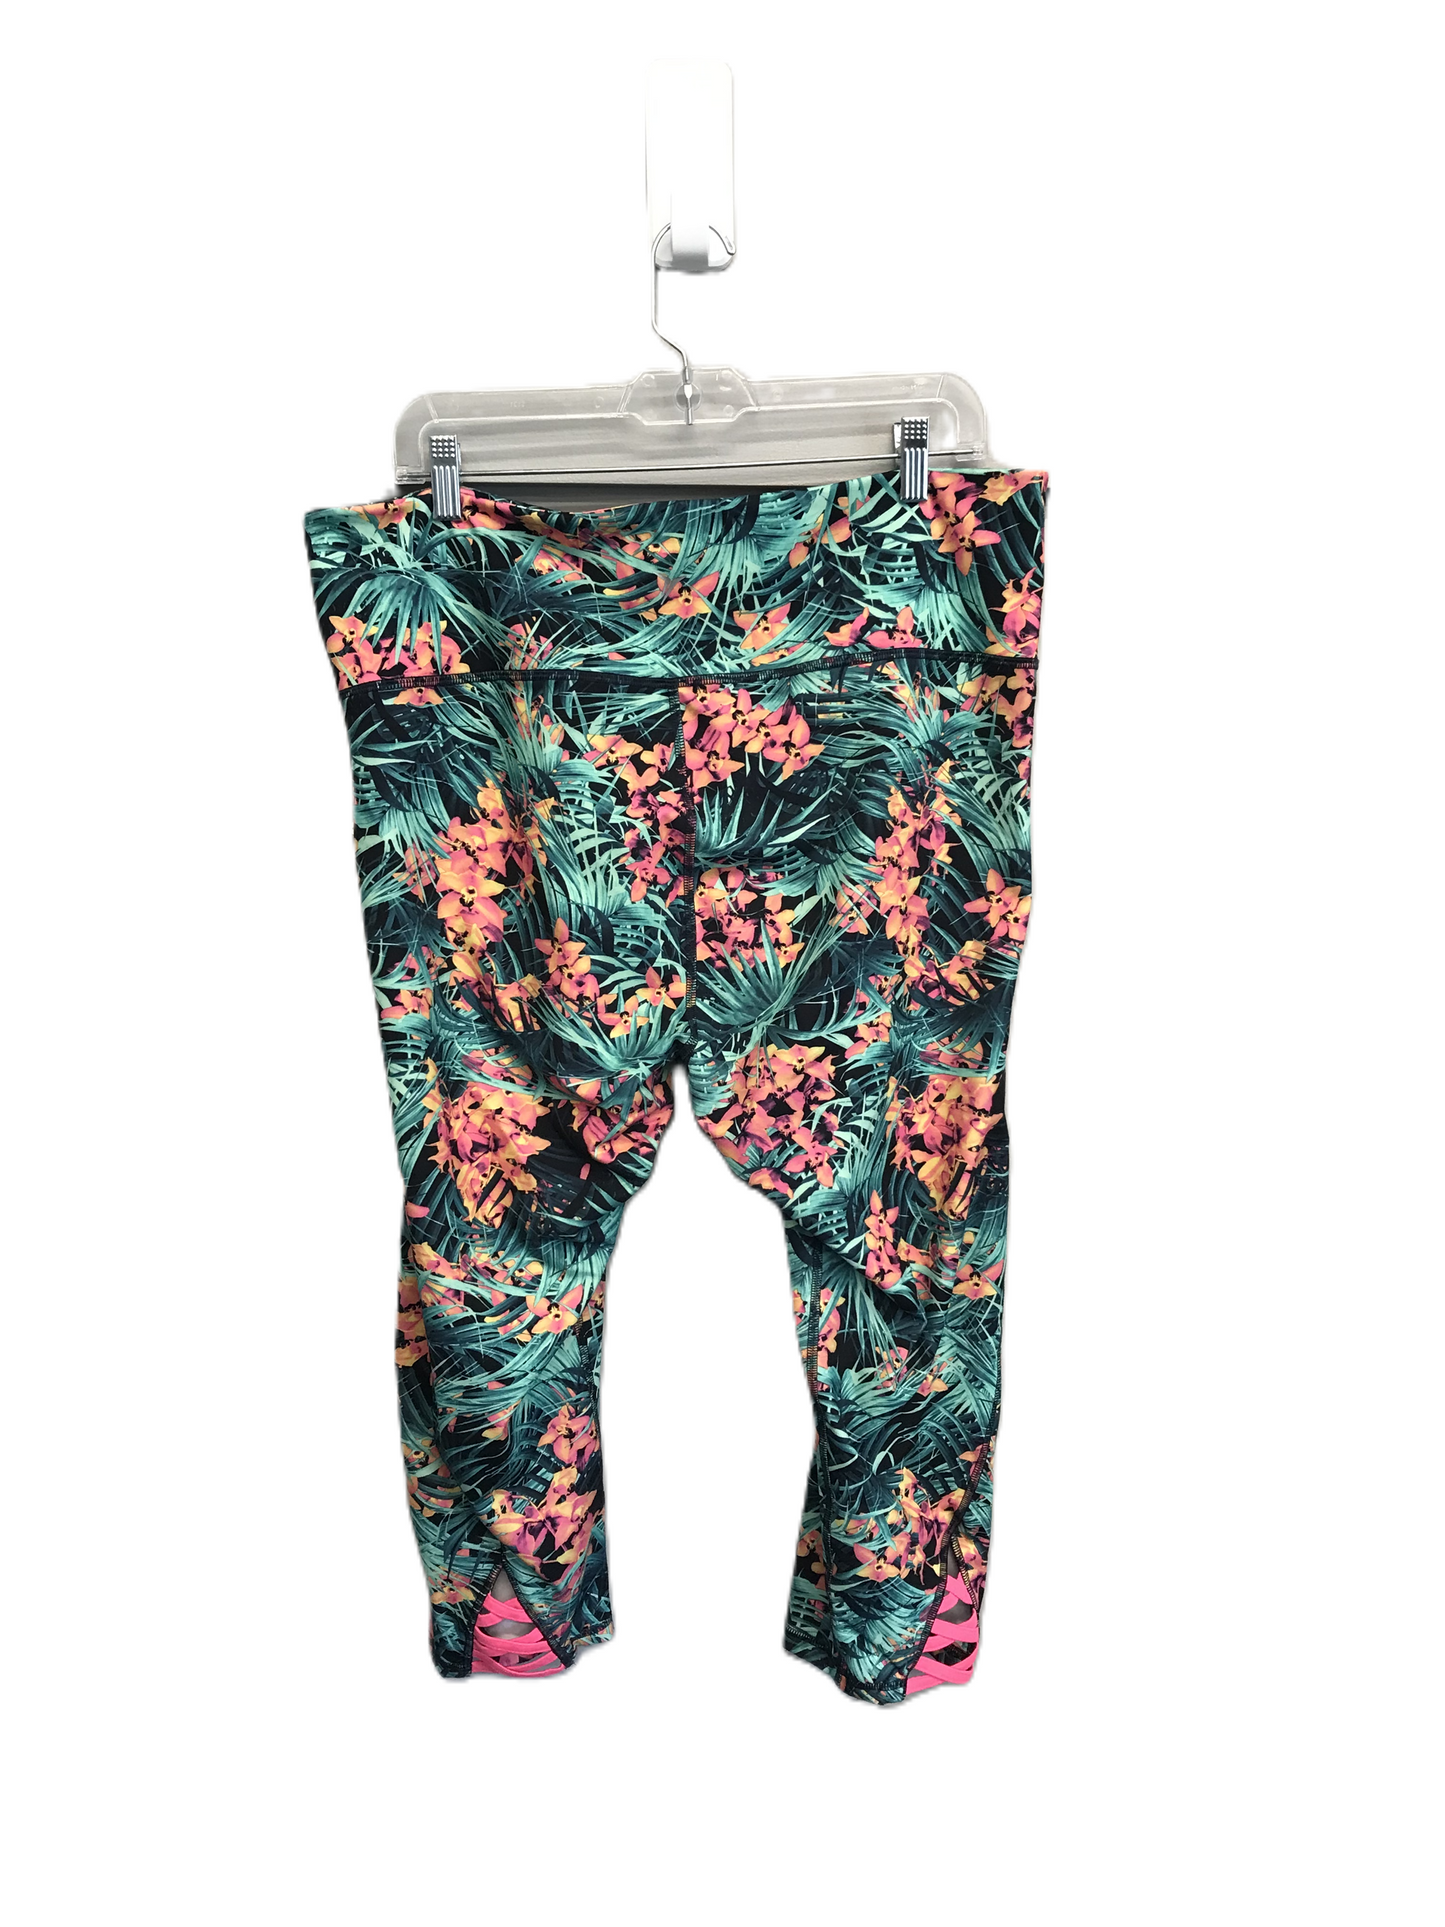 Tropical Print Athletic Capris By Old Navy, Size: 1x